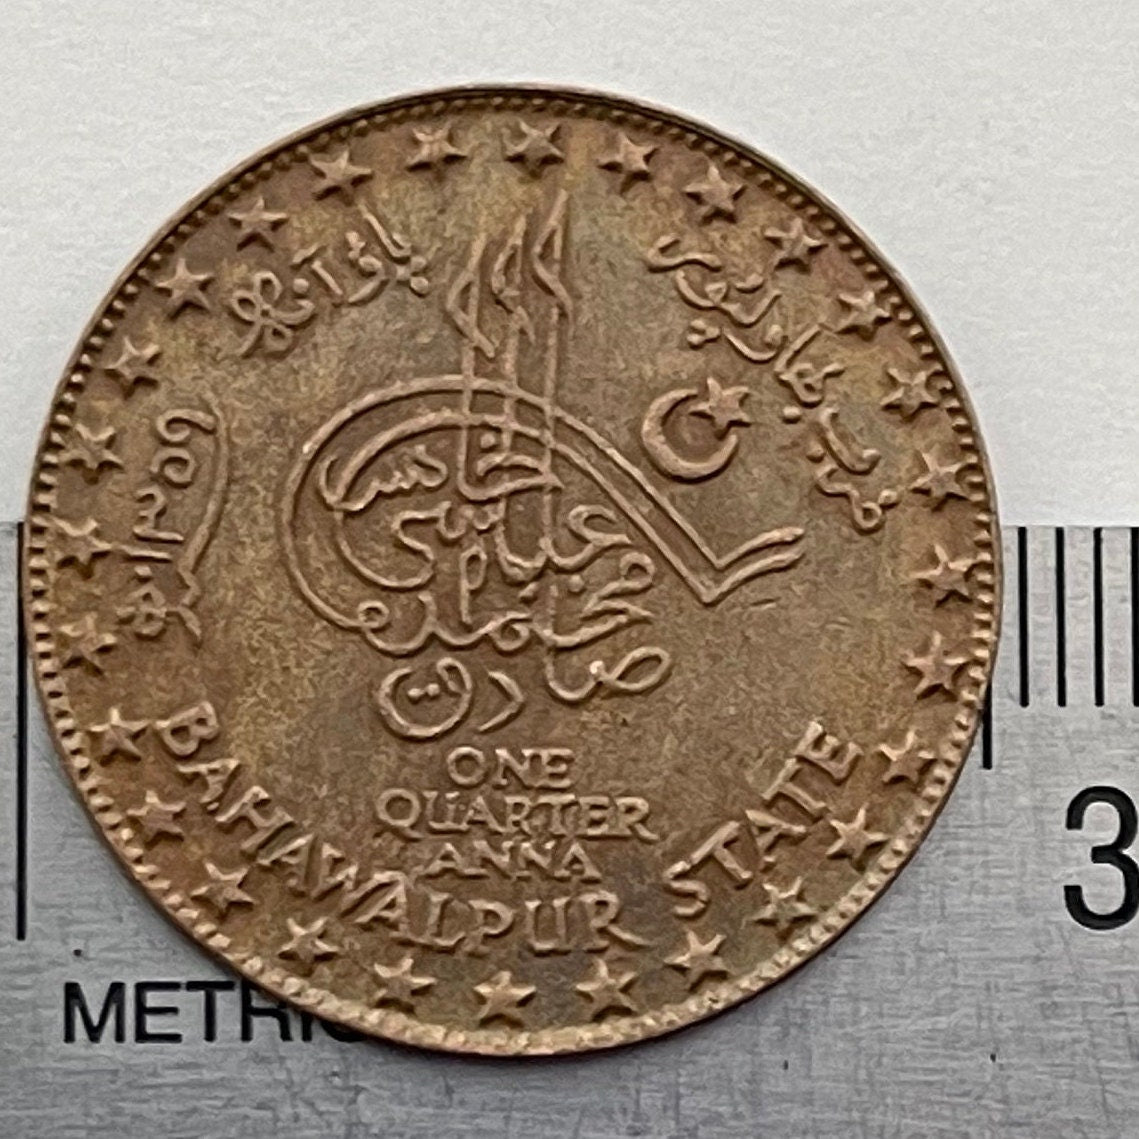 Nawab Sadiq Muhammad Khan V Abbasi & Tughra with Star and Crescent Bahawalpur Princely State Quarter Anna India Authentic Coin for Jewelry